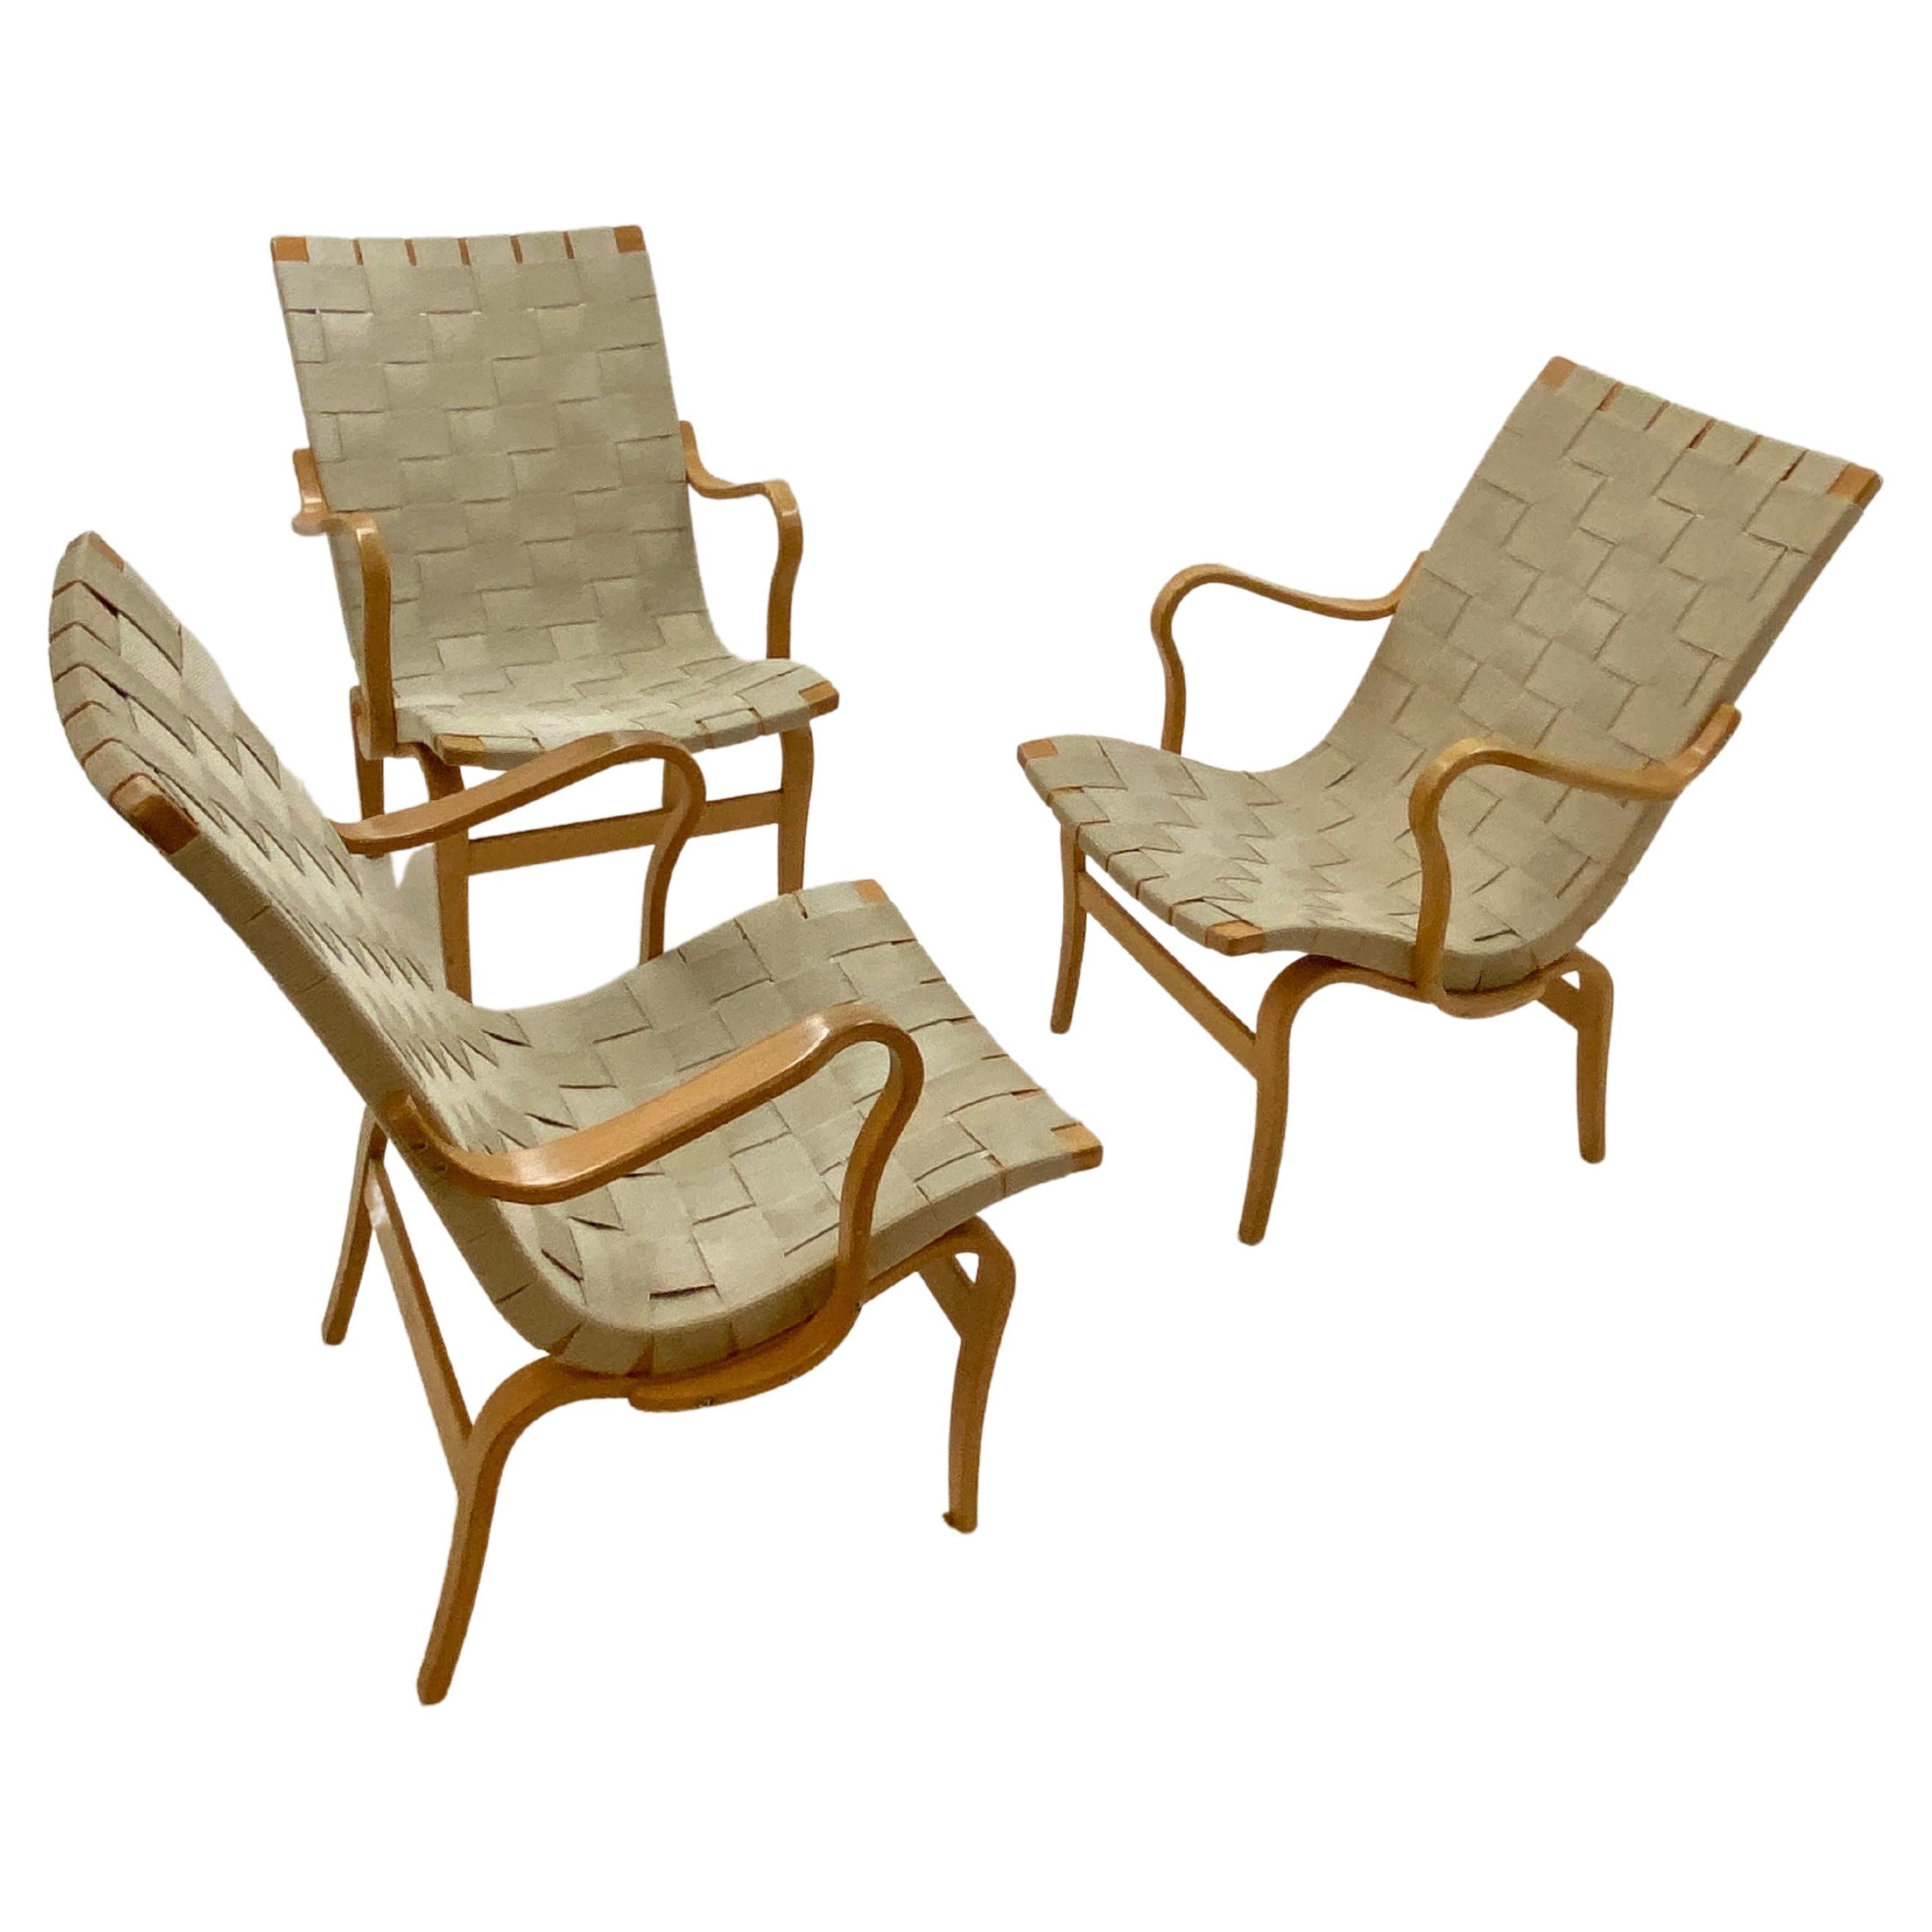  "Eva" Lounge Chair by Dux Created by Bruno Mathsson 1960s Scandinavian Modern For Sale